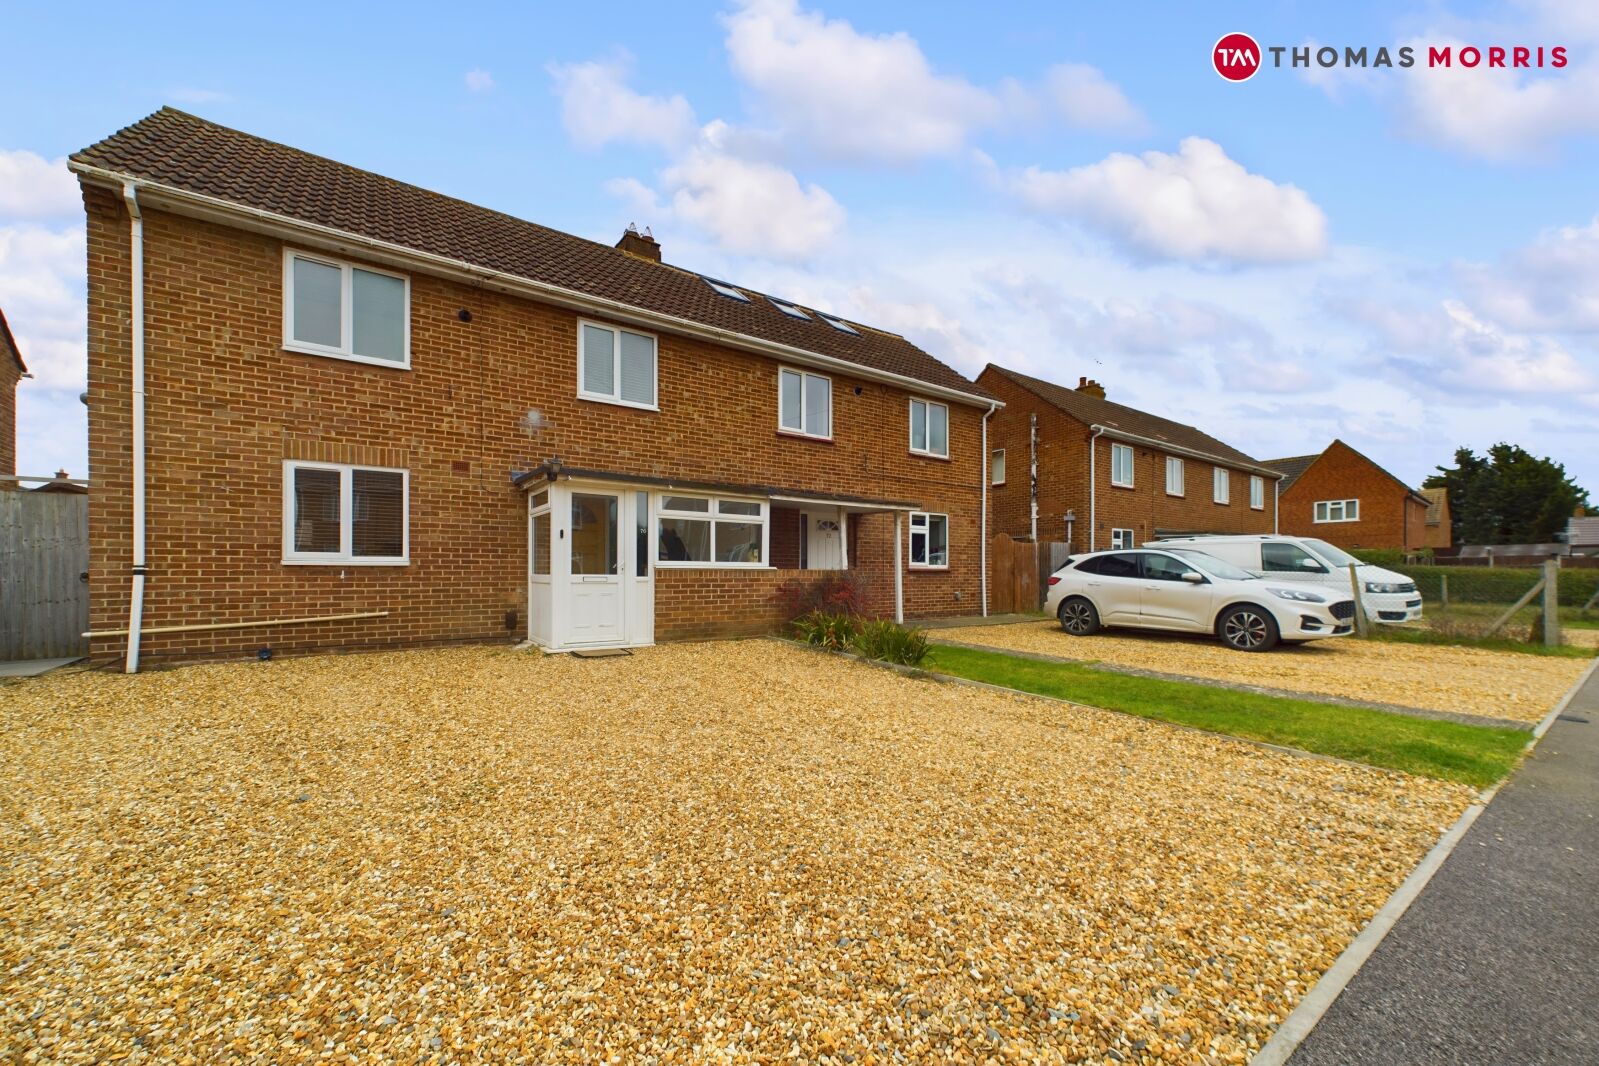 2 bedroom semi detached house for sale Queensway, St. Neots, PE19, main image